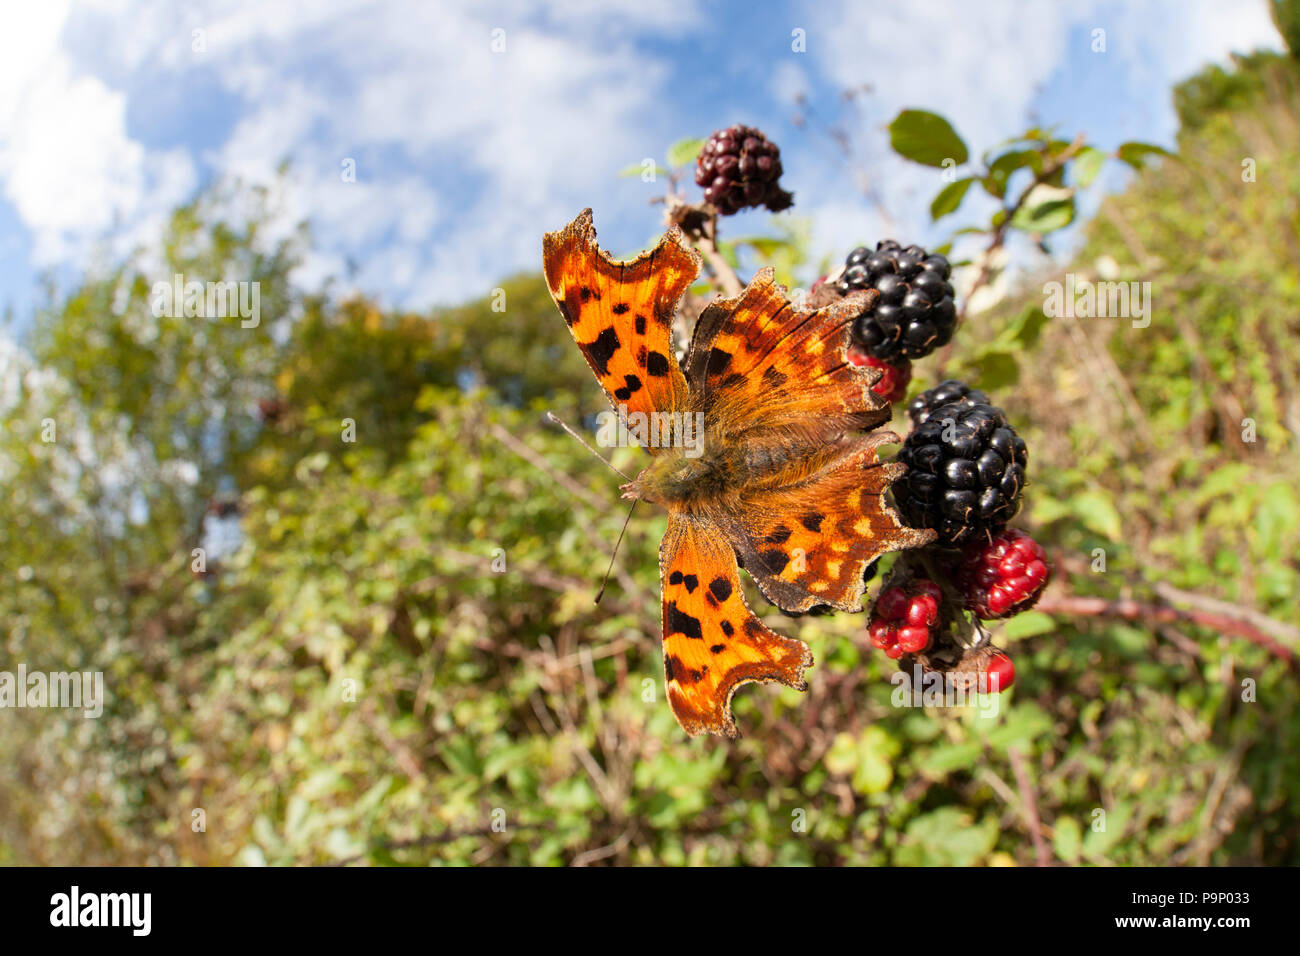 A Comma butterfly, Polygonia c-album, with wings open on blackberries in a hedgerow. North Dorset England UK GB Stock Photo